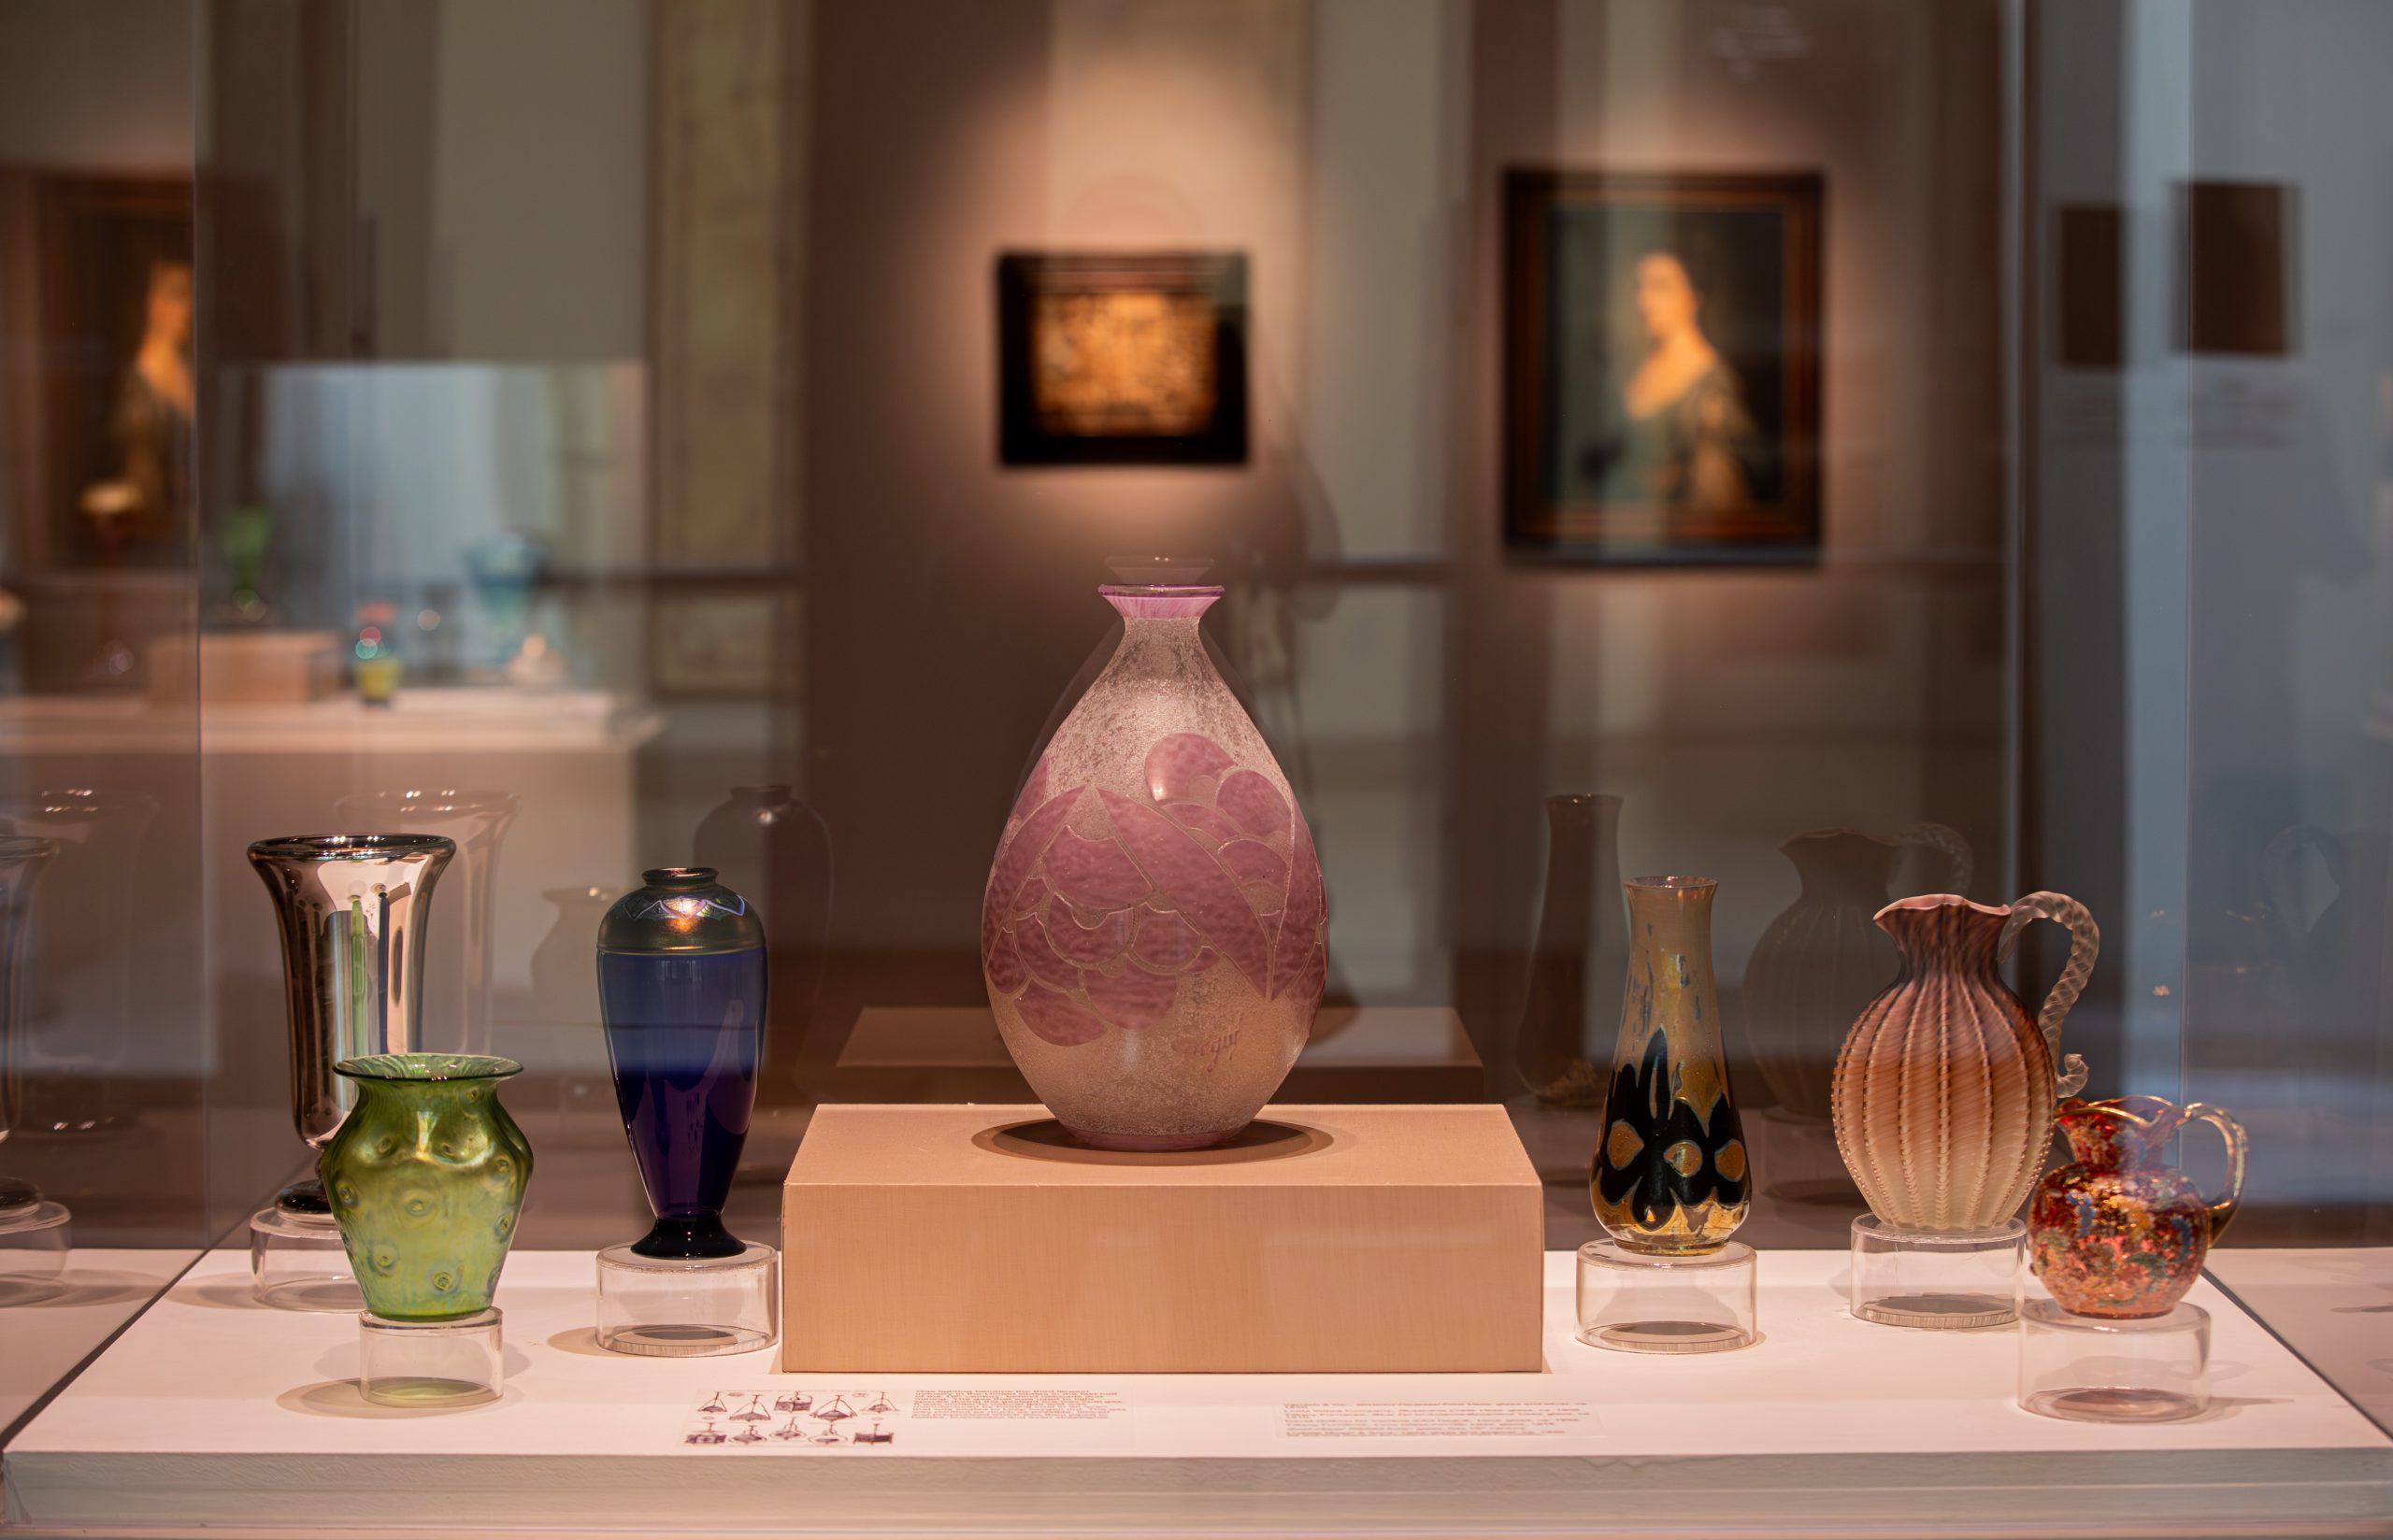 Display case of glass vases